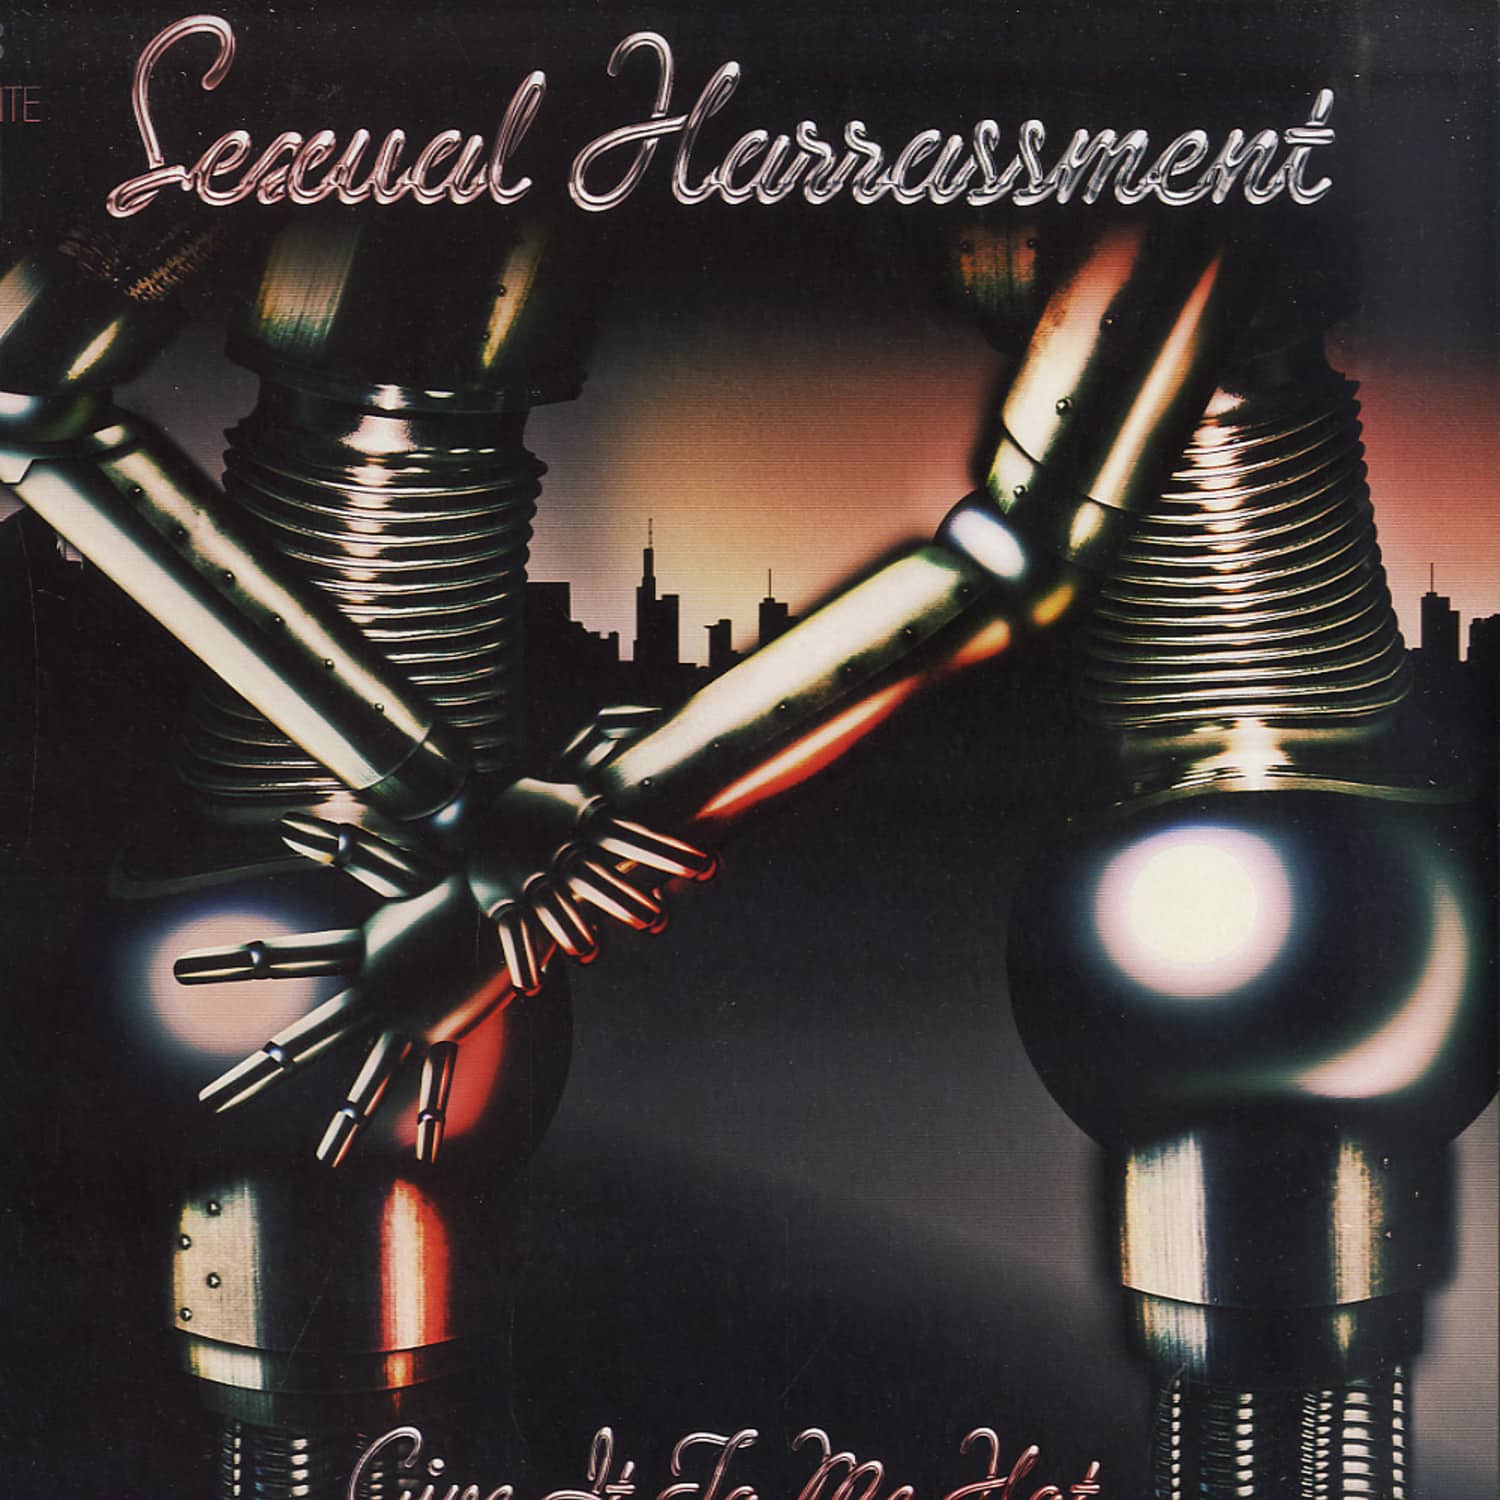 Sexual Harrassment - GIVE IT TO ME HOT